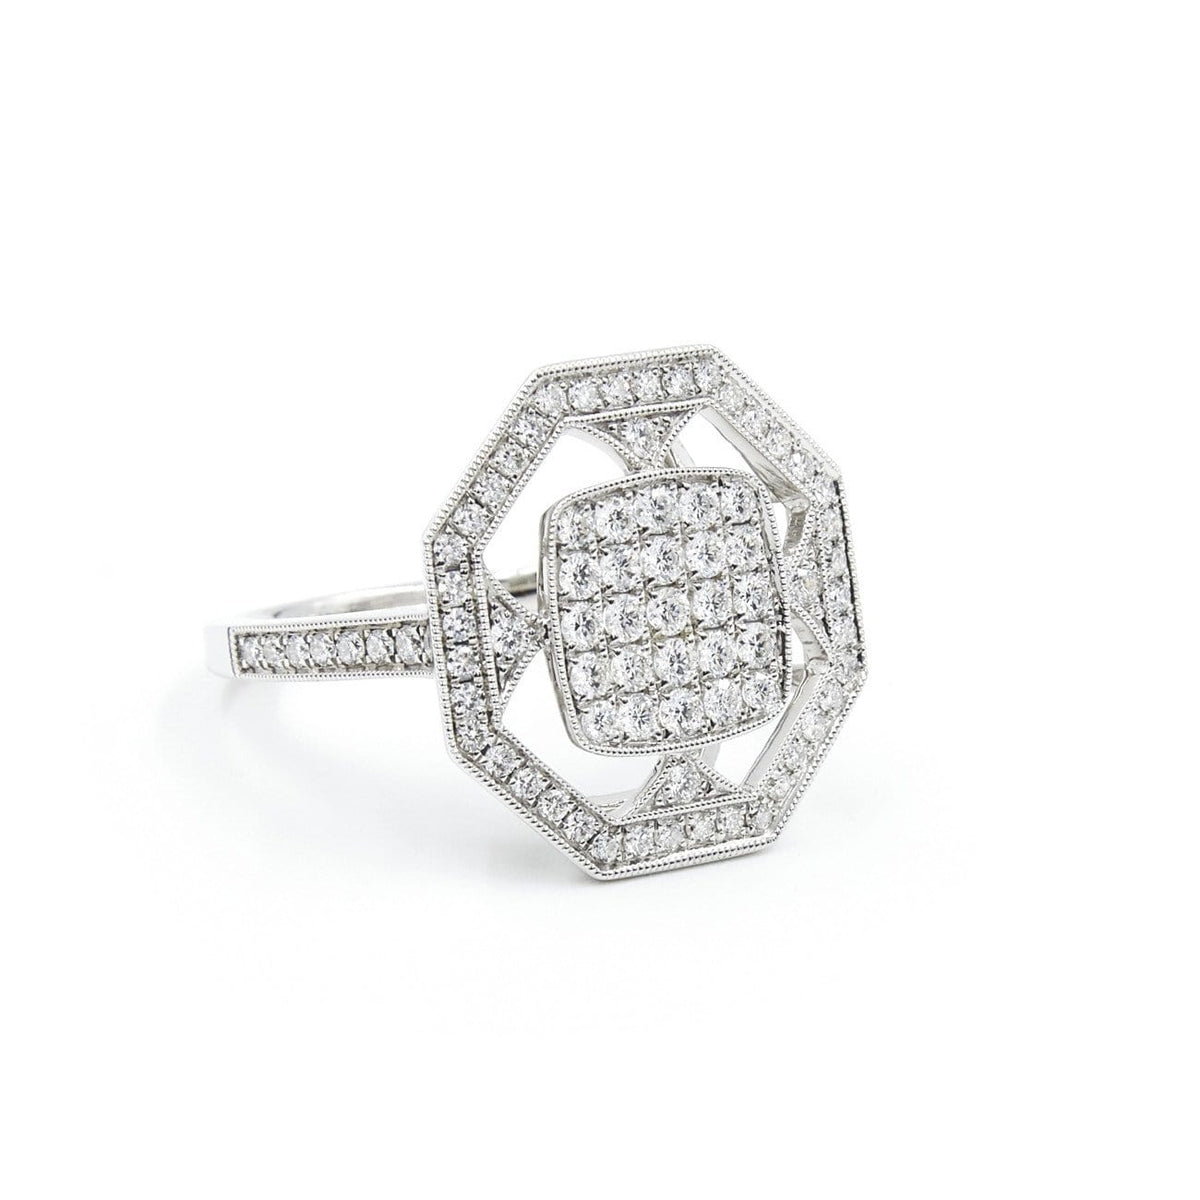 CHRIS AIRE DIAMOND RING - Chris Aire Fine Jewelry & Timepieces